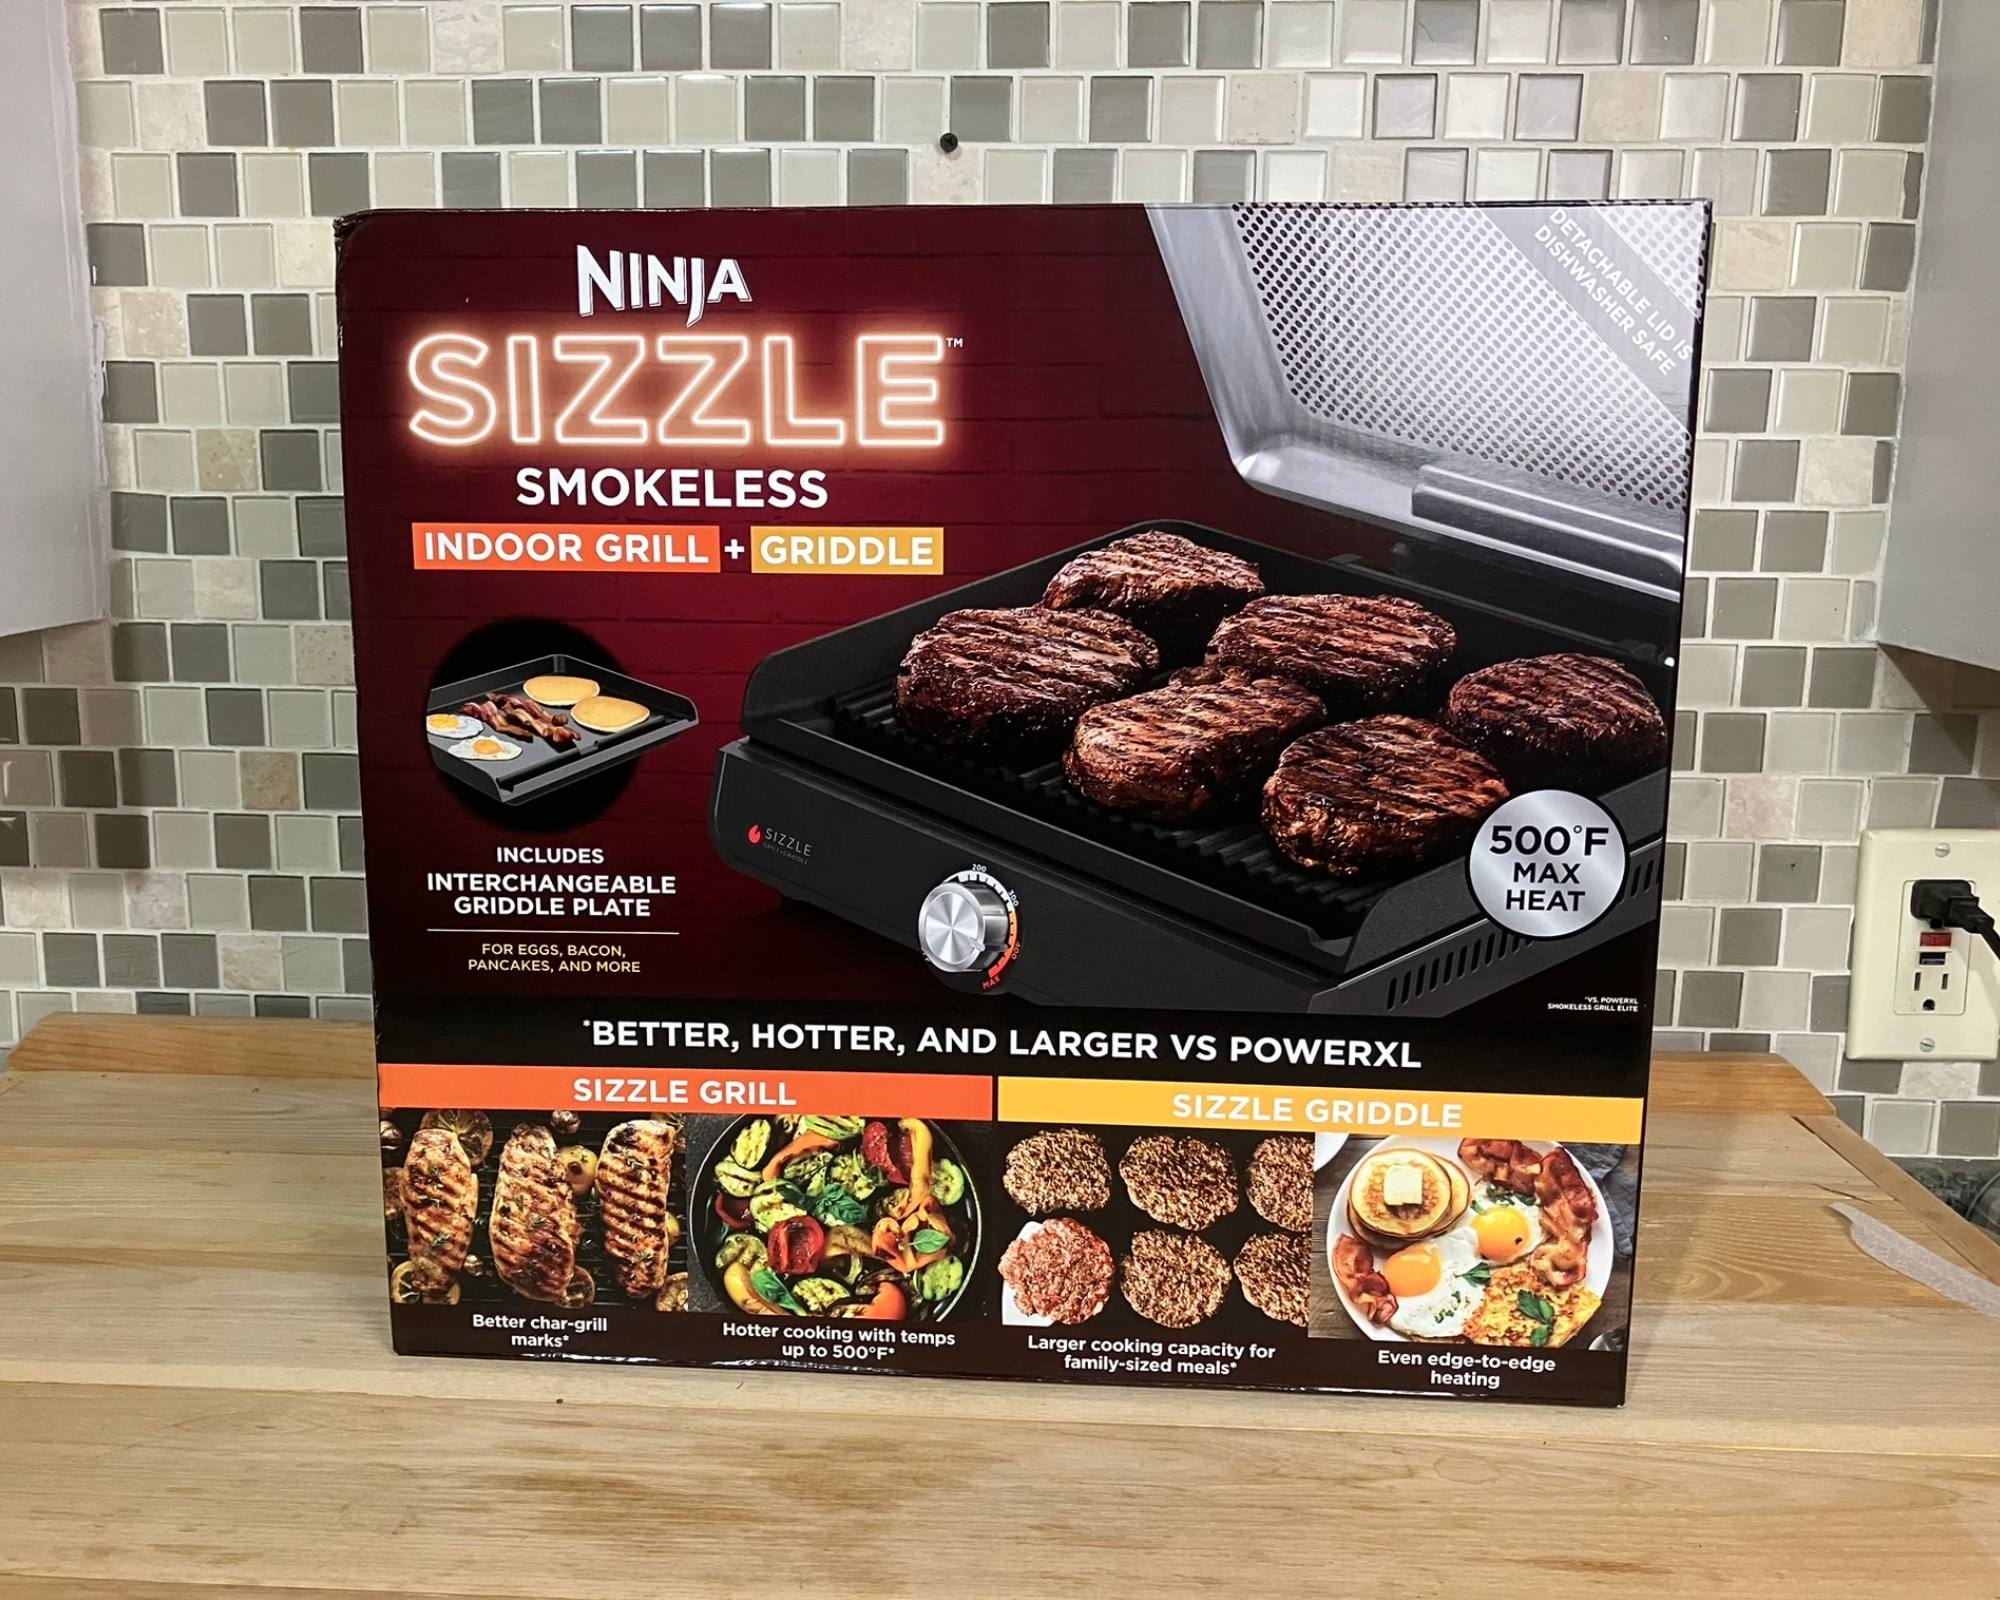 amazon, ninja sizzle smokeless indoor grill and griddle: a lightweight broiler for burgers, and brunch items